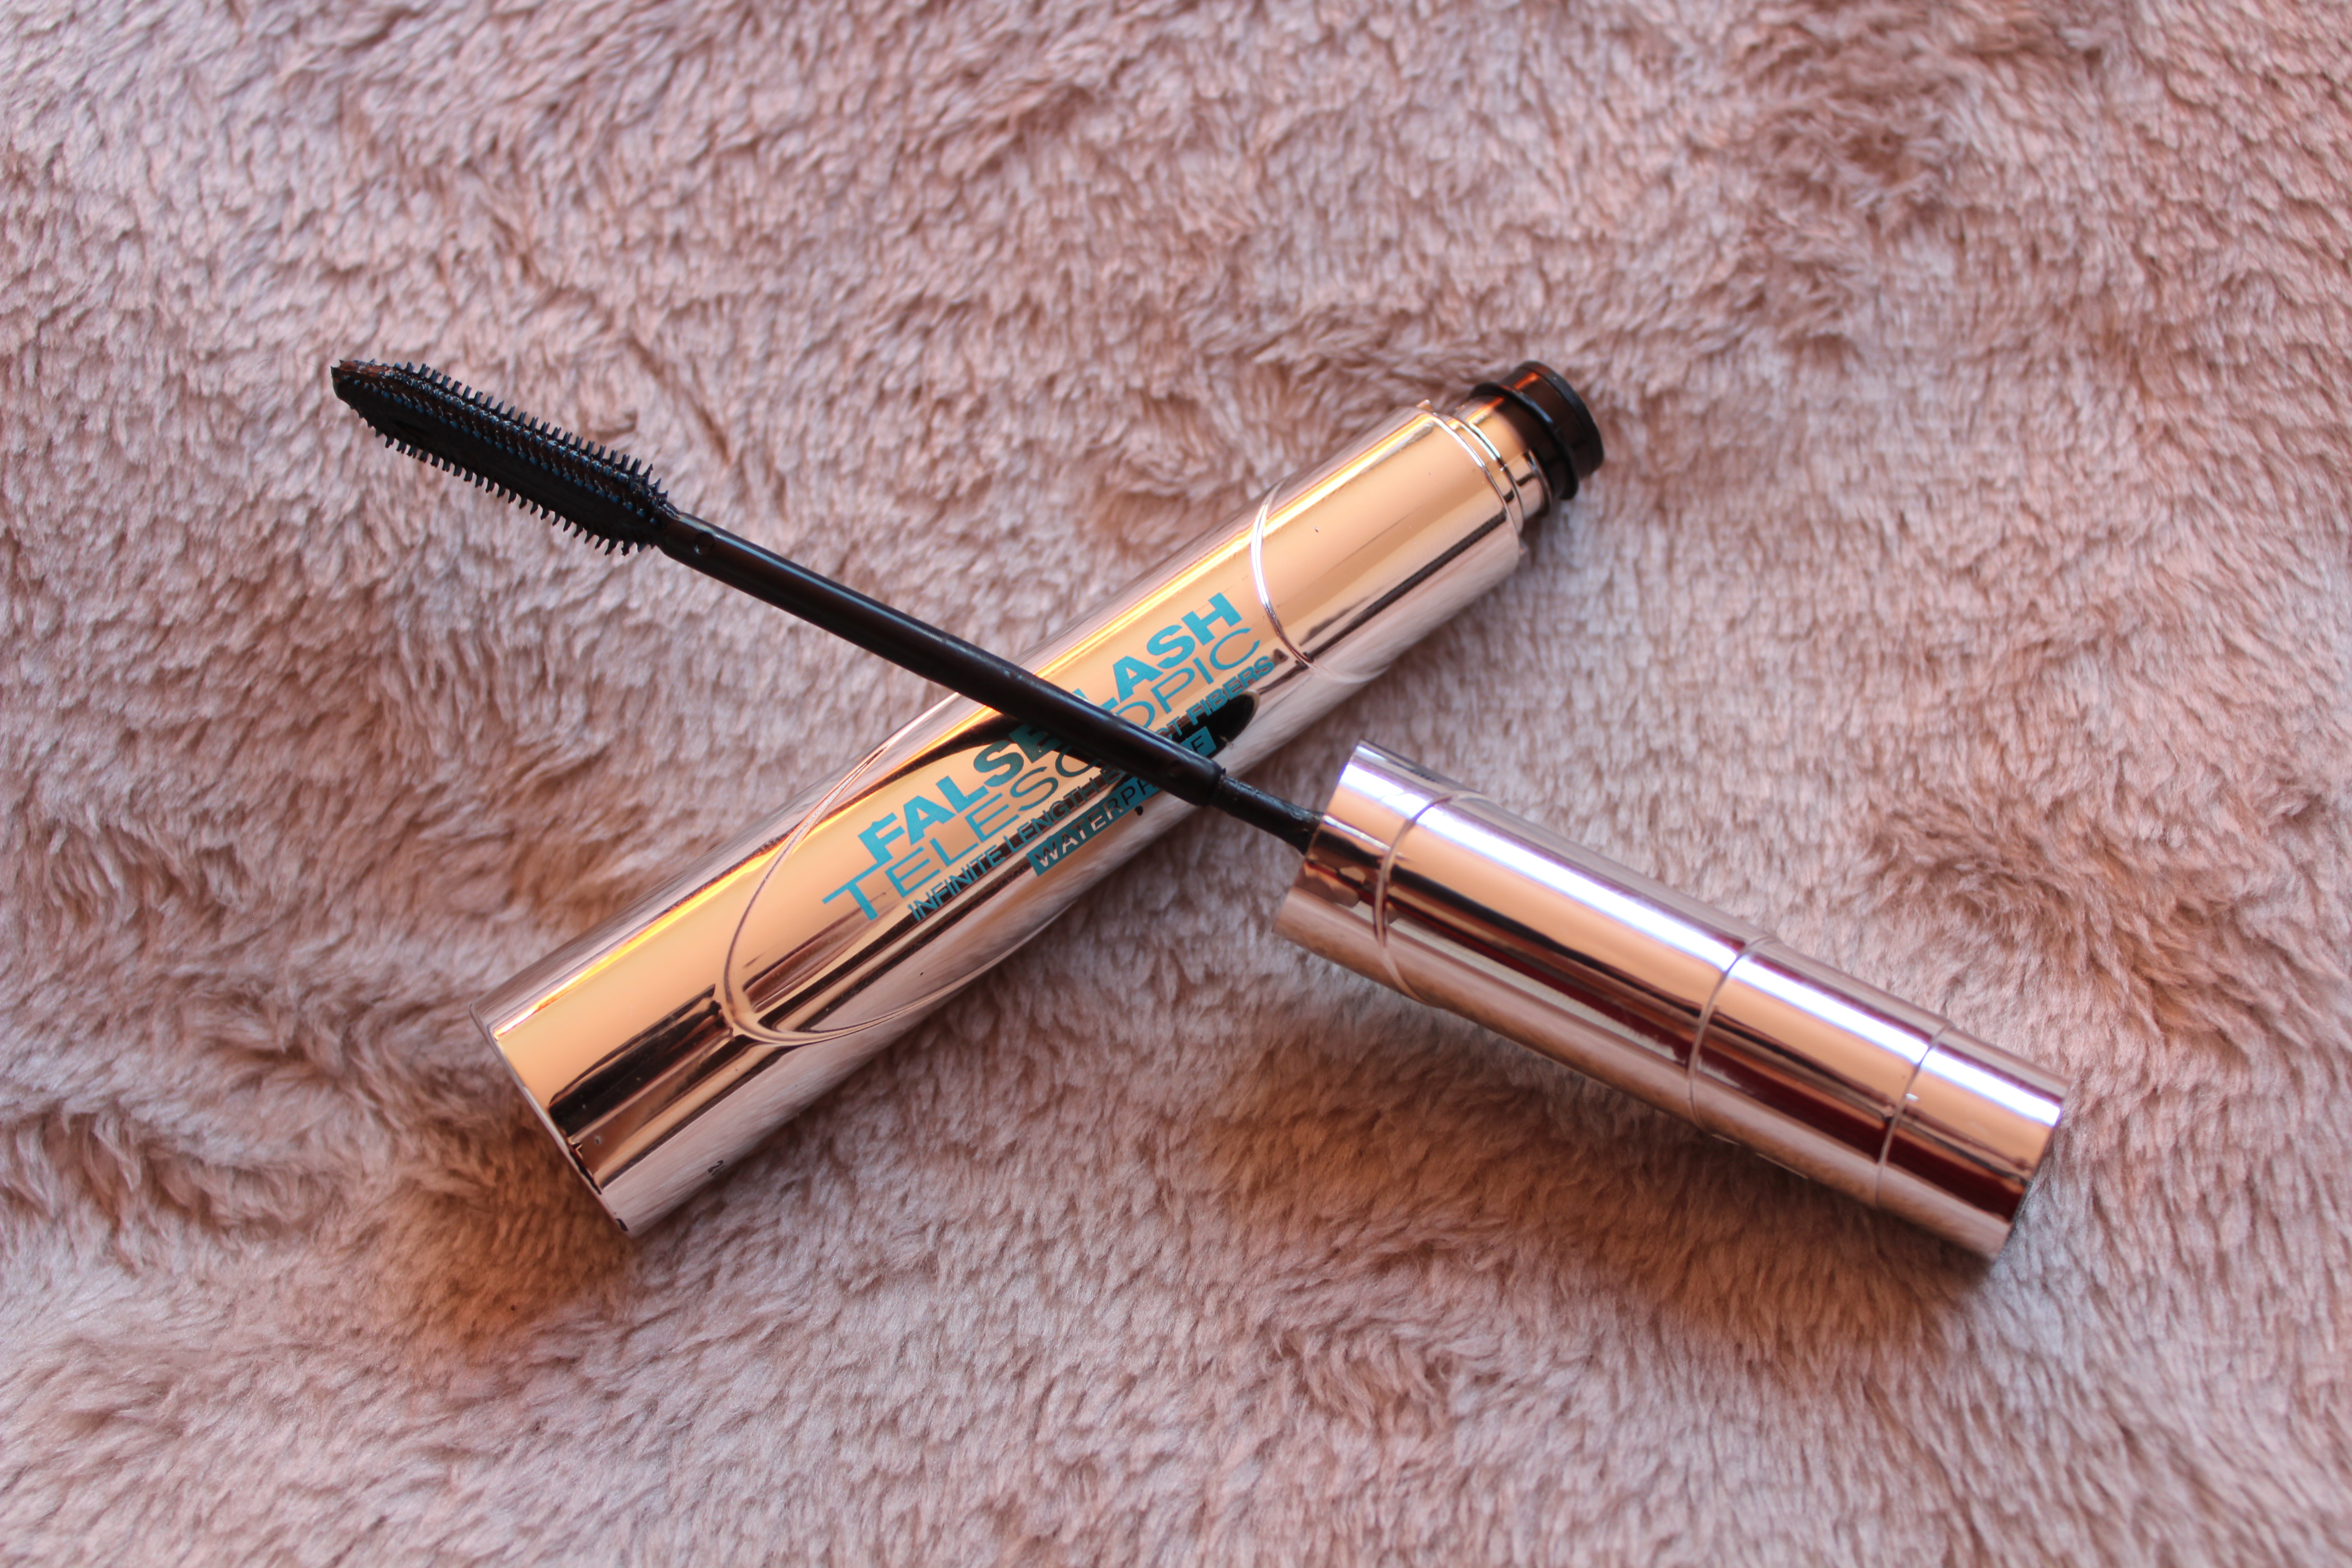 Vil have Væk historie Loreal False Lash Telepscopic Waterproof Mascara Review - Face Made Up -  Beauty Product Reviews, Makeup Tutorial Videos & Lifestyle